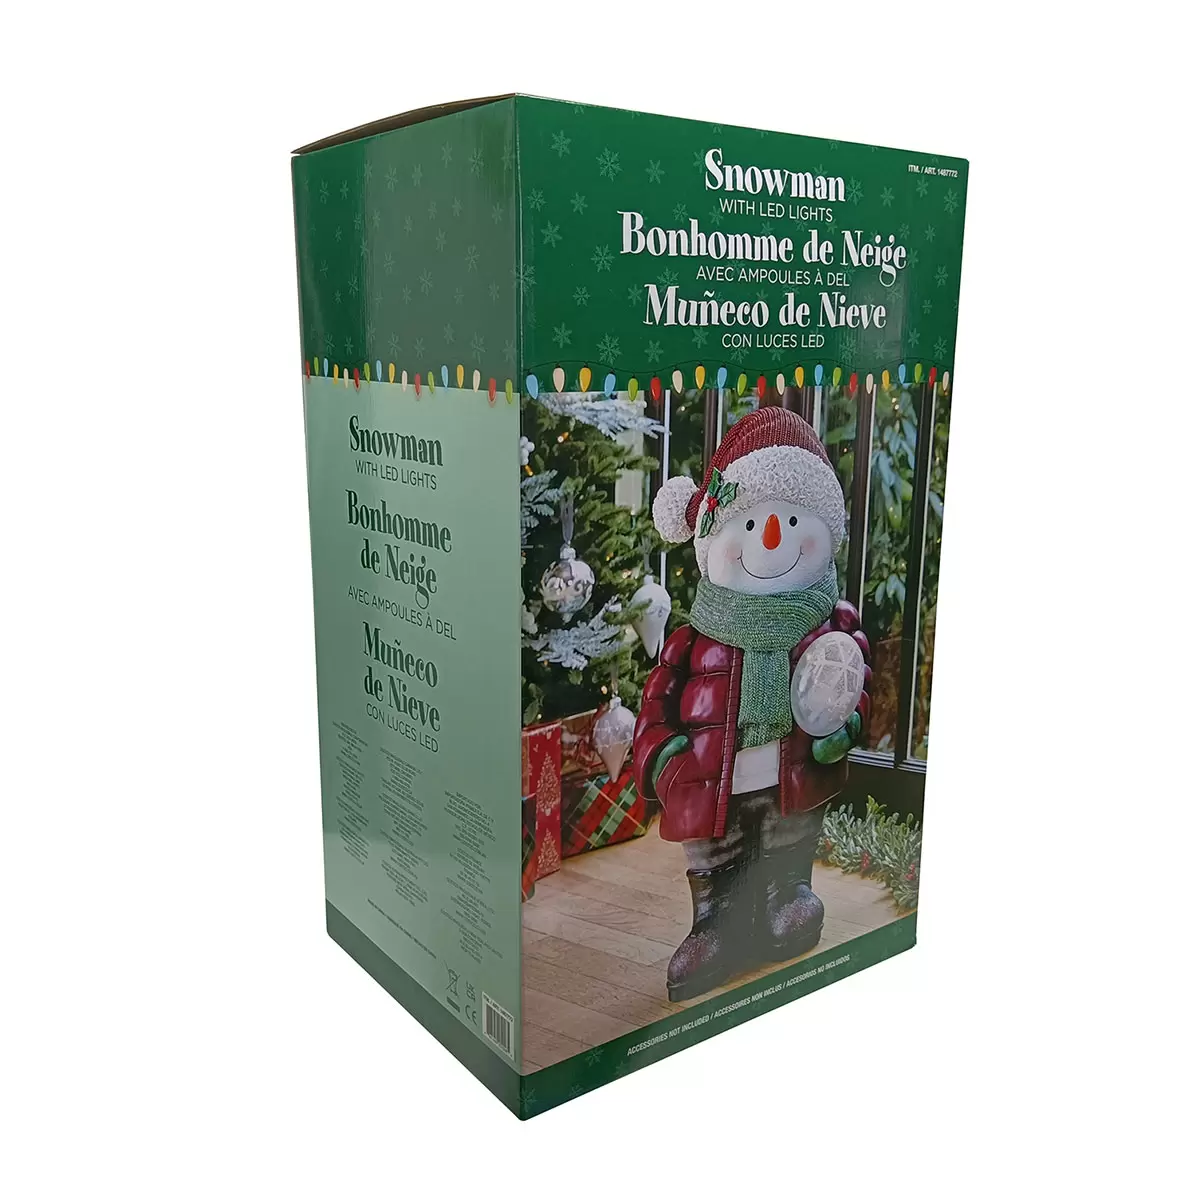 Buy Snowman Greeter with Glass LED Ball Box Image at Costco.co.uk